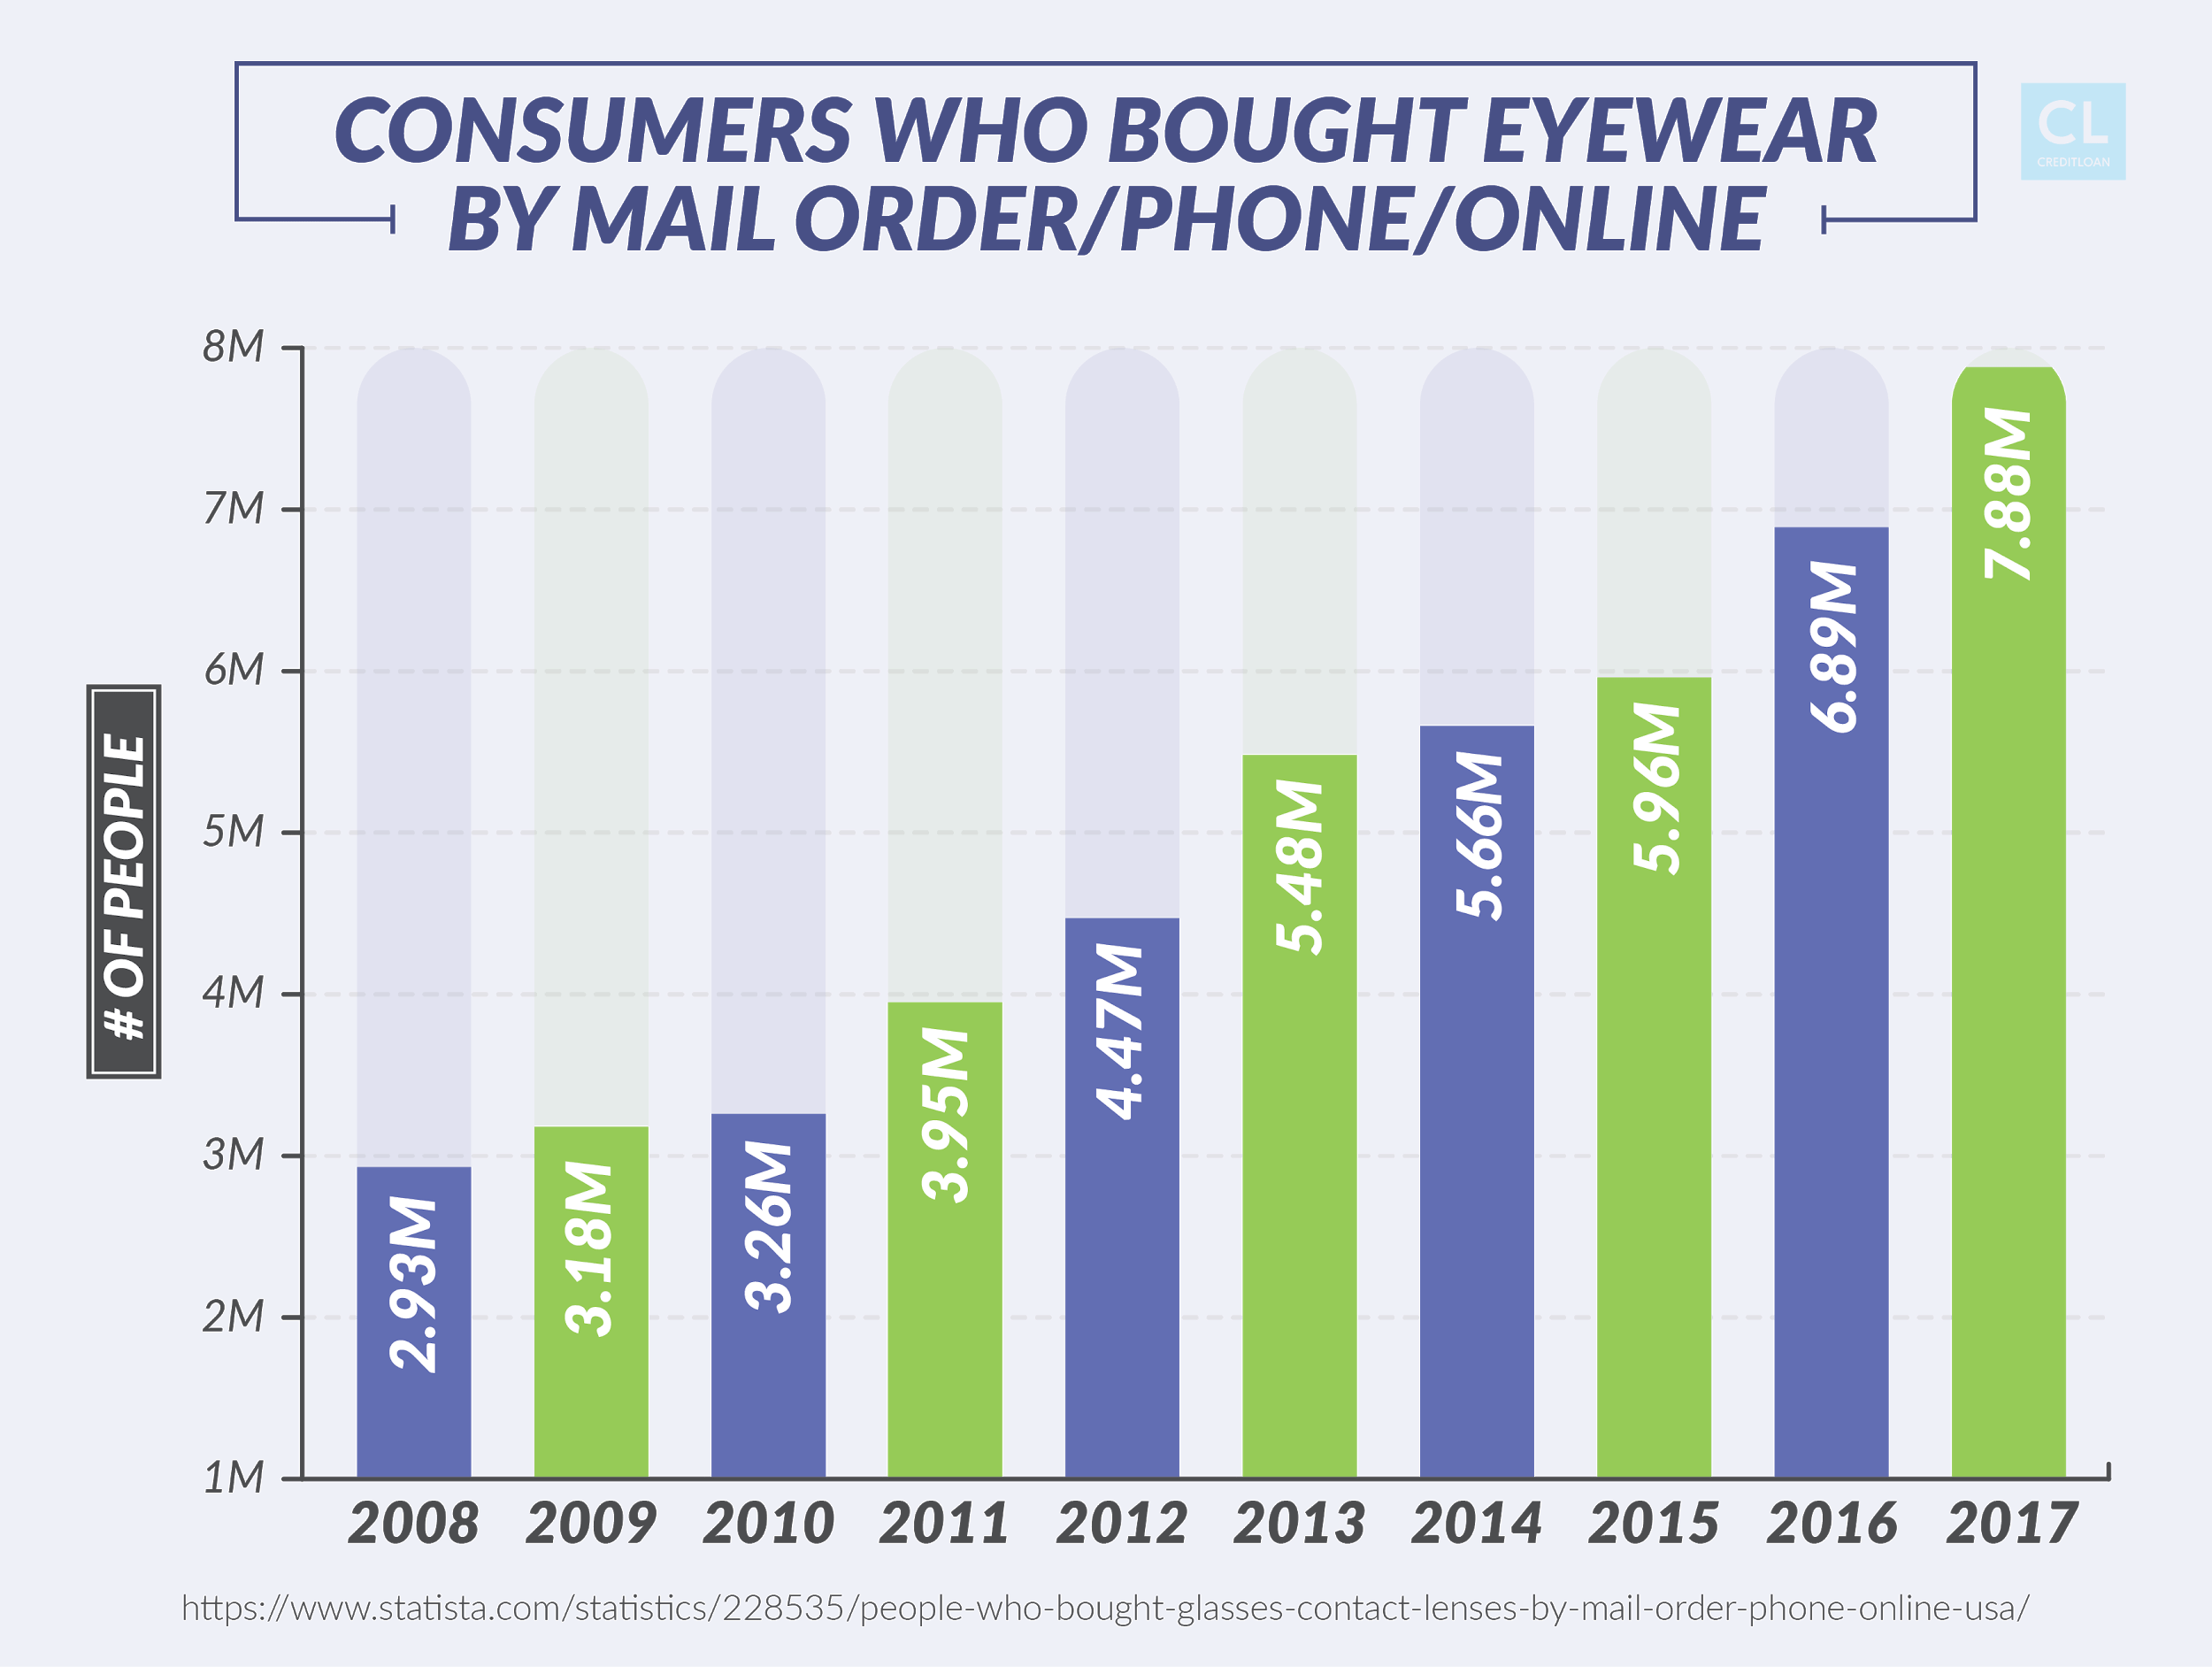 Consumers Who Bought Eyewear By Mail Order/Phone/Online from 2008-2017